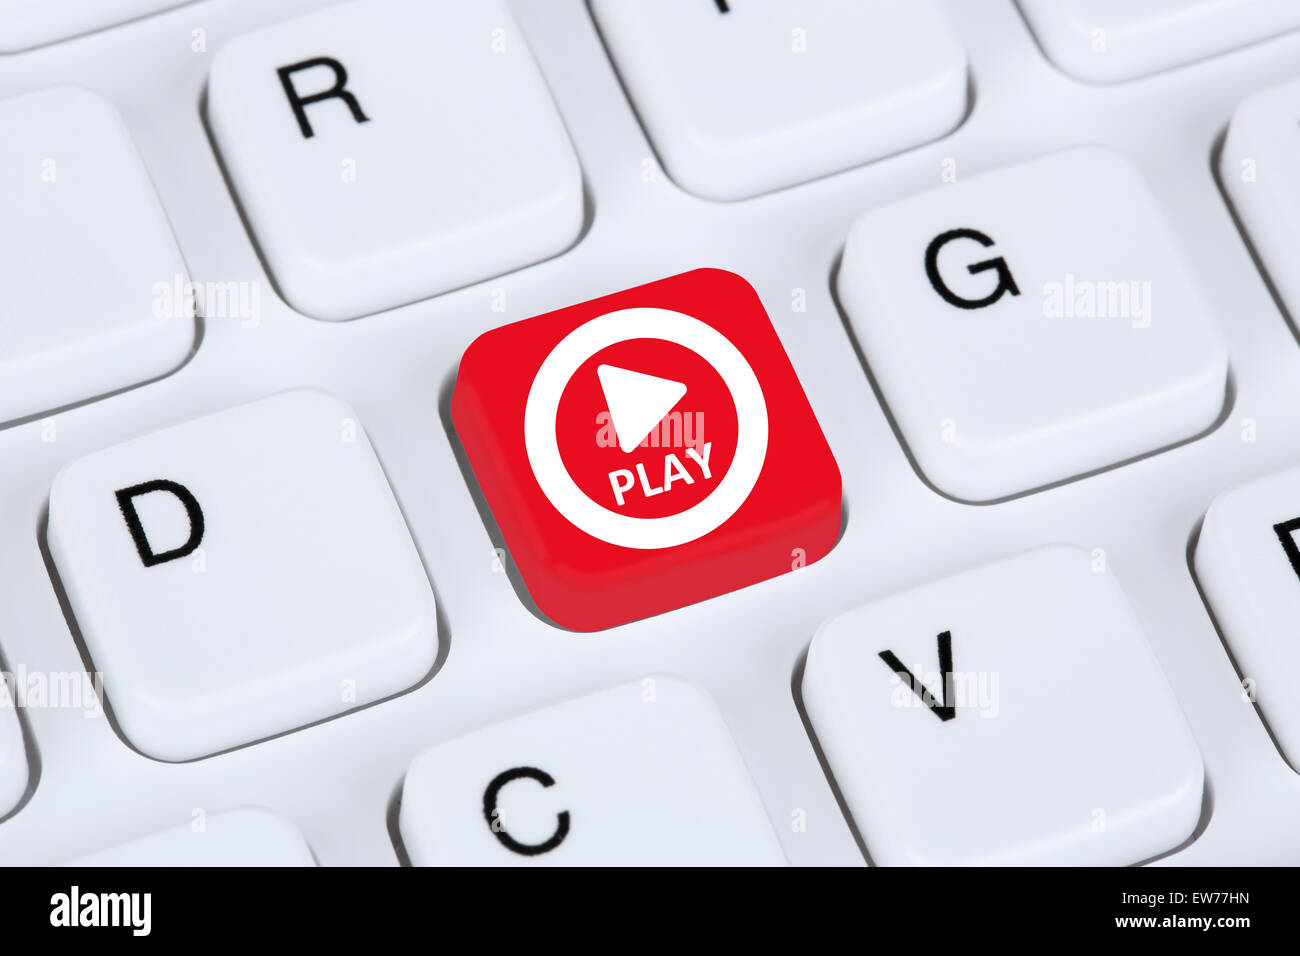 Play Button for listening to music or movie on internet computer keyboard Stock Photo